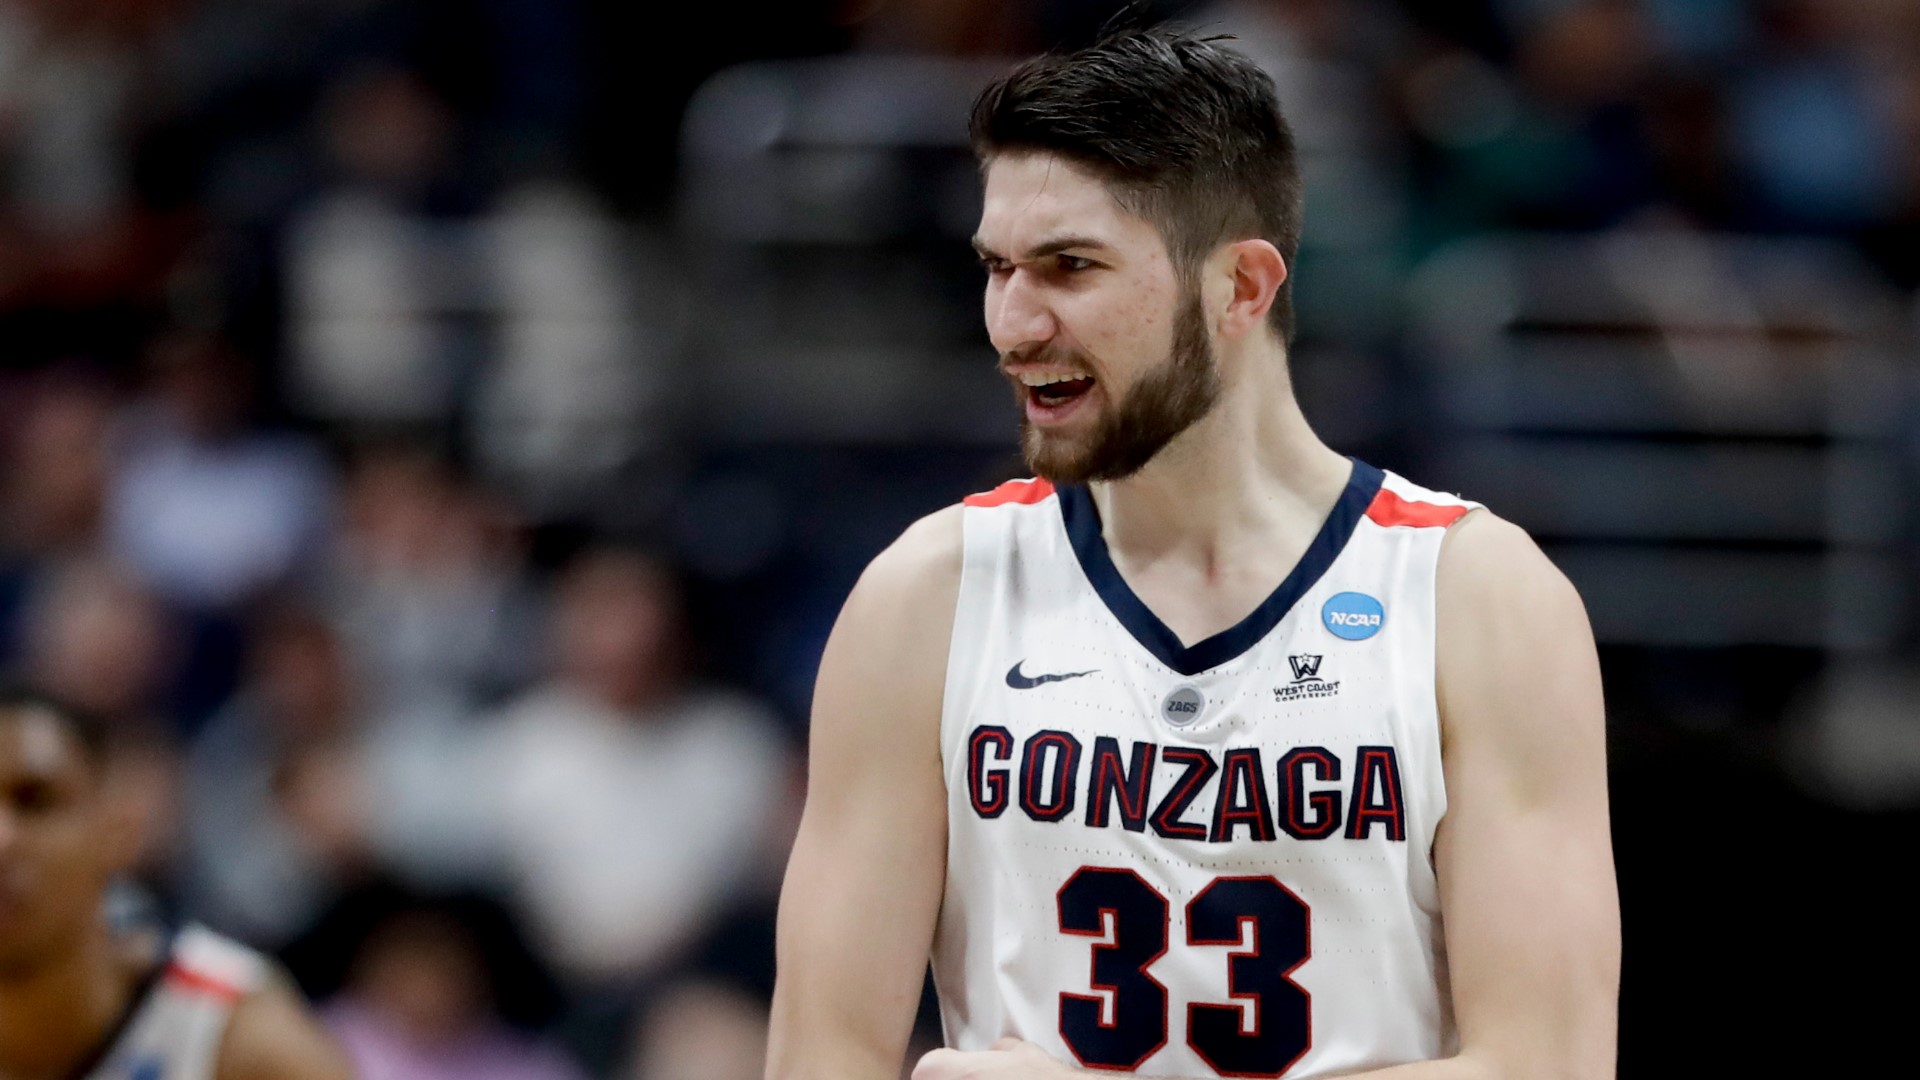 The Gonzaga forward suffered a hip injury in the 2018 NCAA Tournament run. It ended his season. His determination to get stronger after that inspired the team.